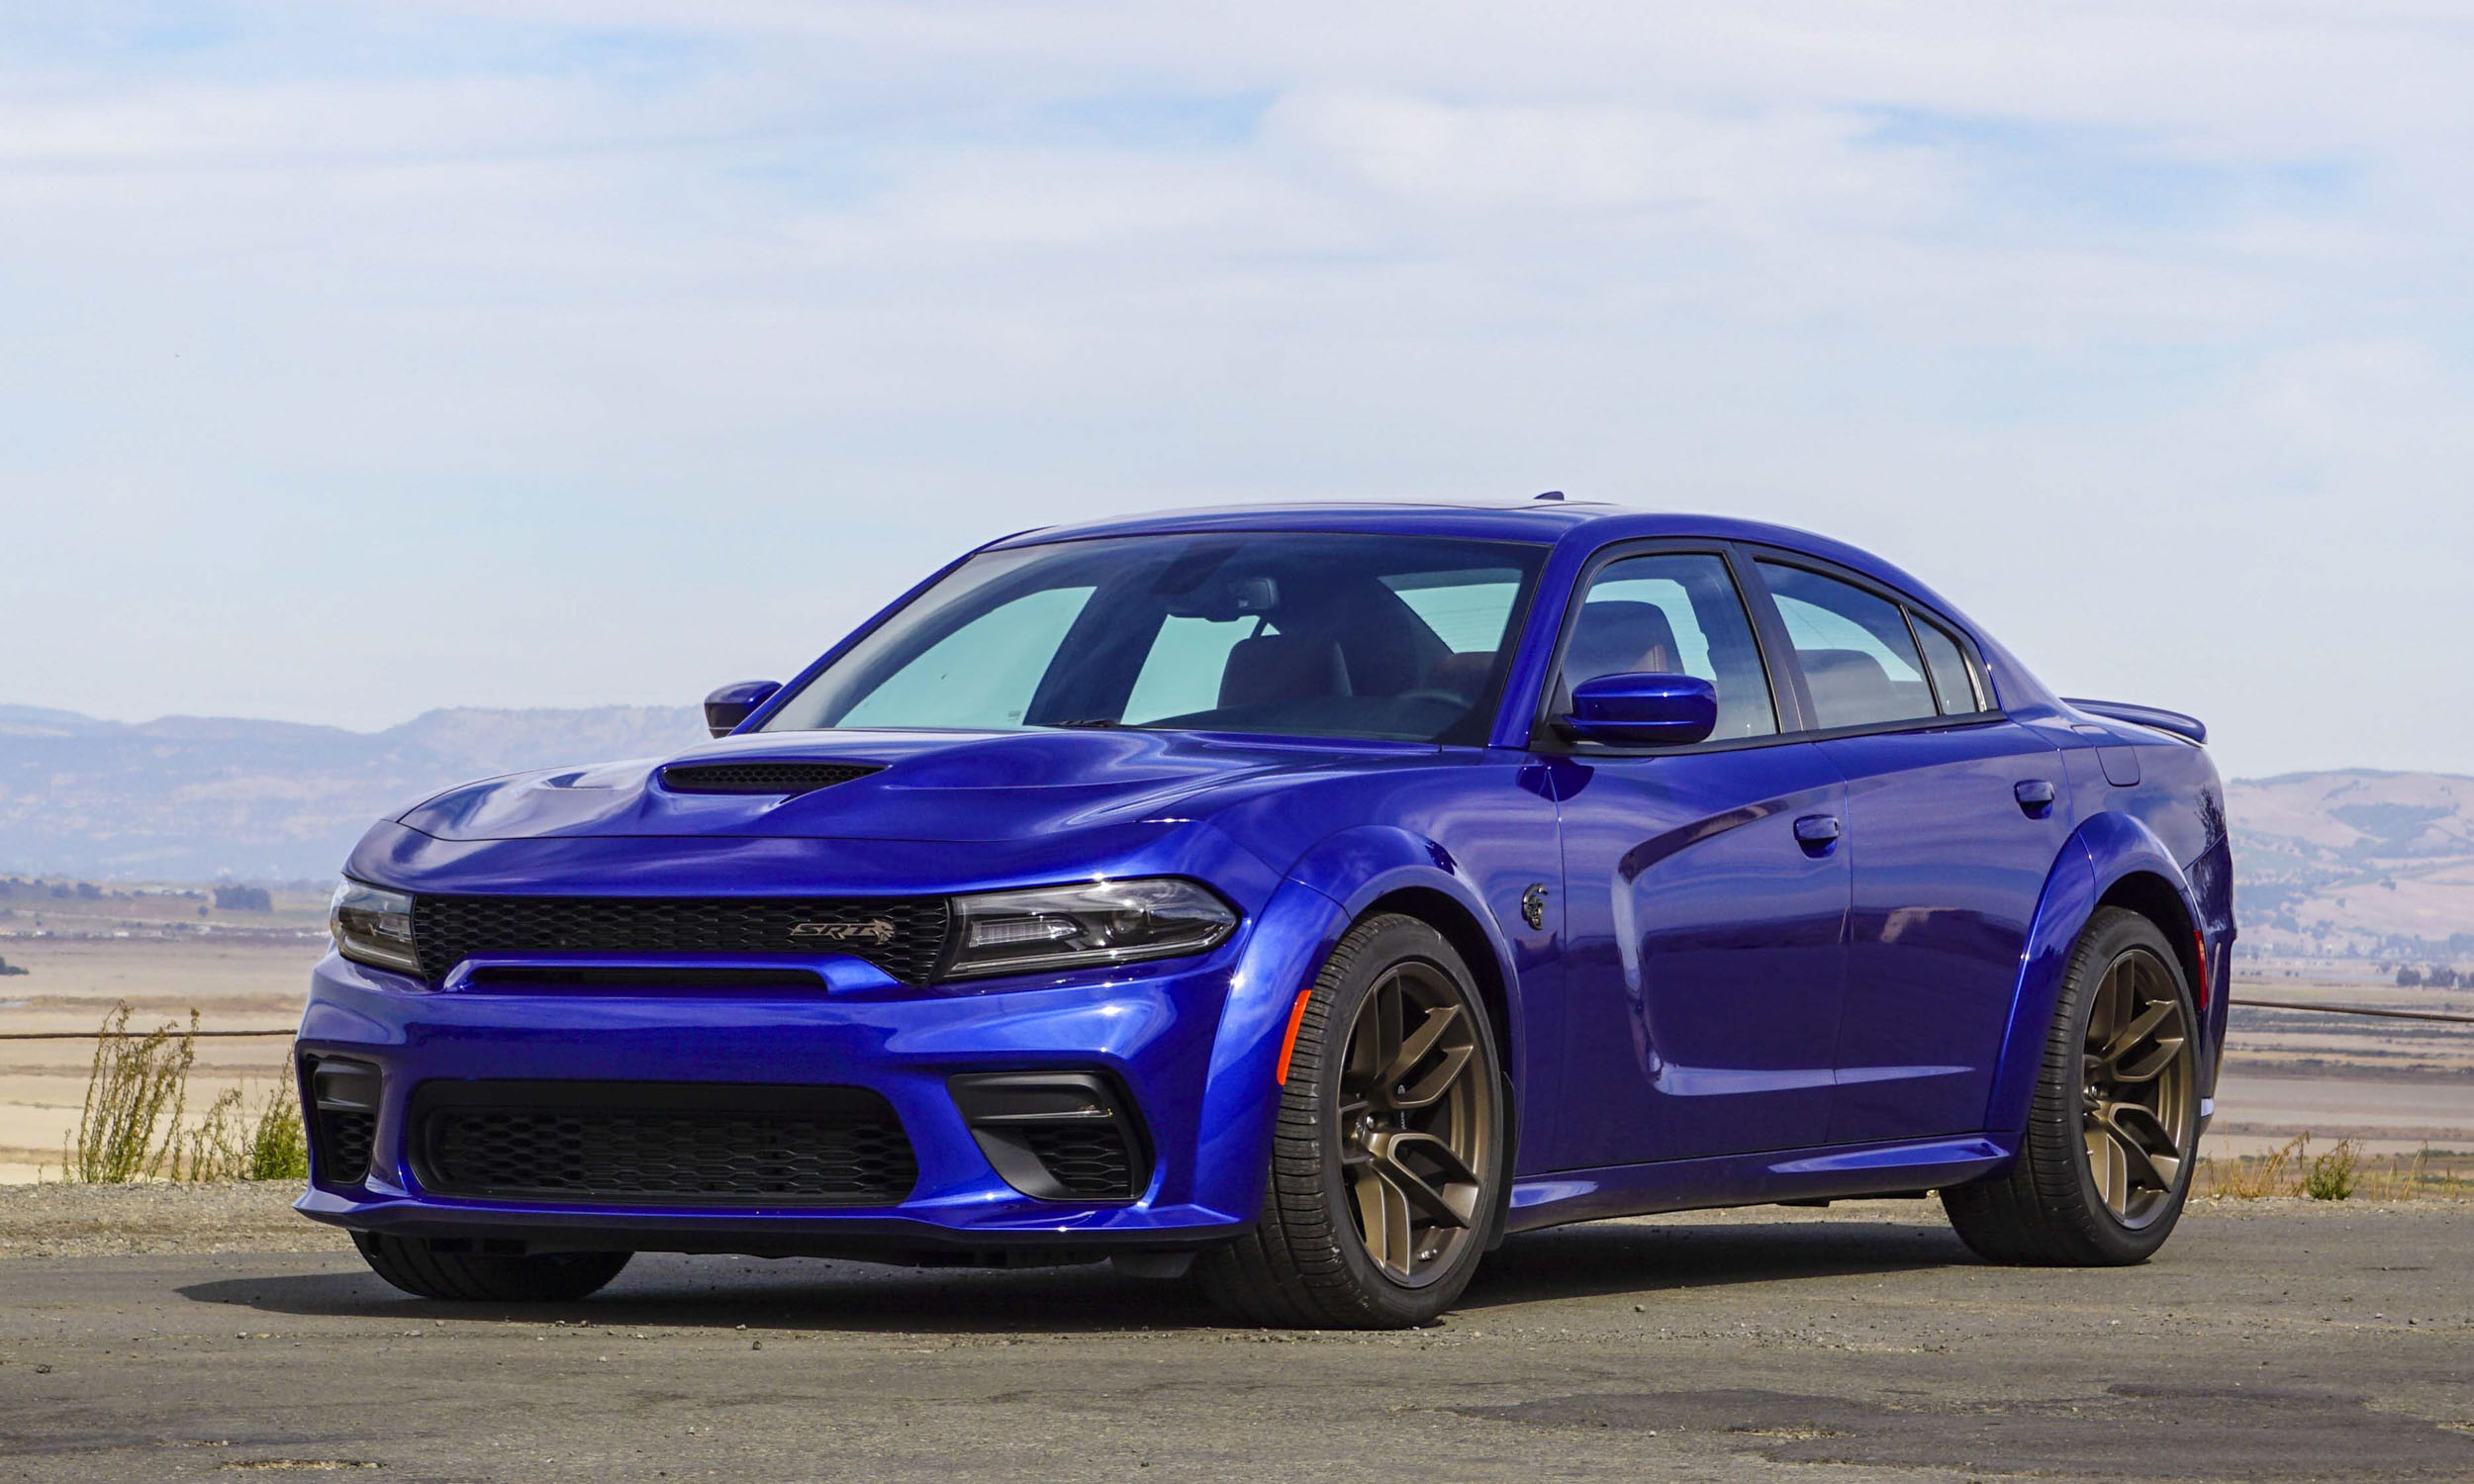 2020 Dodge Charger SRT Hellcat: First Drive Review | Our Auto Expert